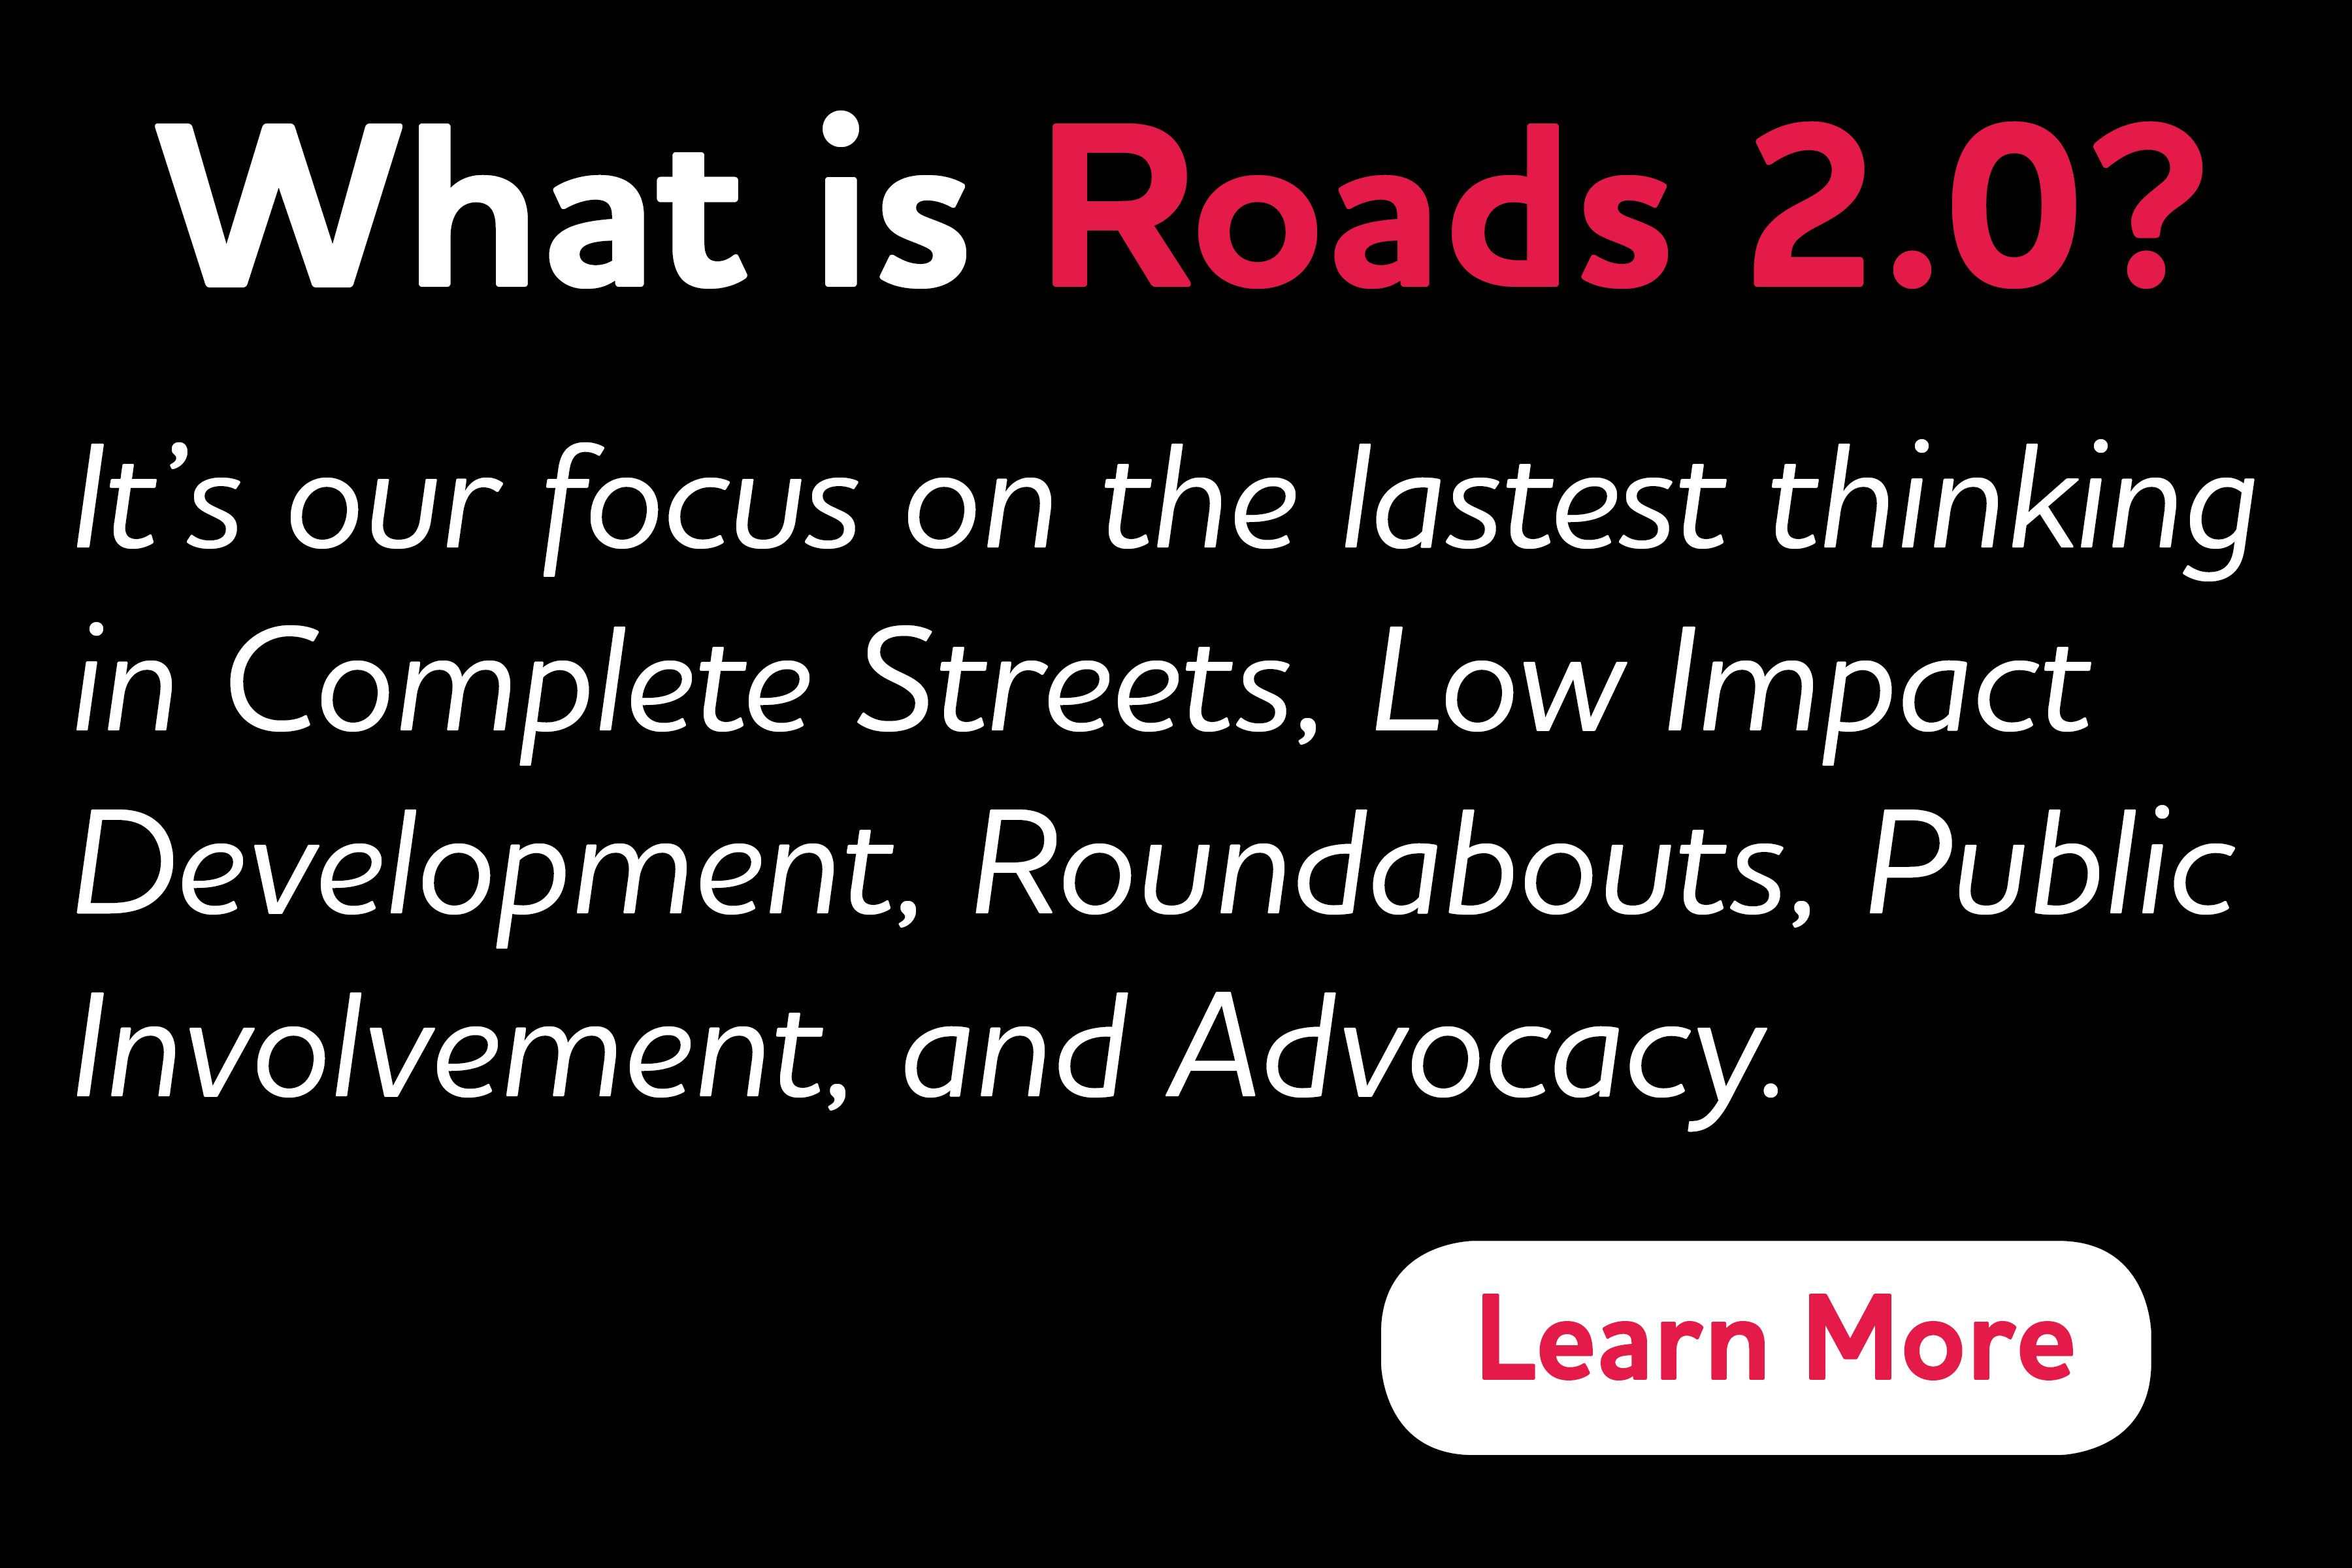 What is Roads 2.0